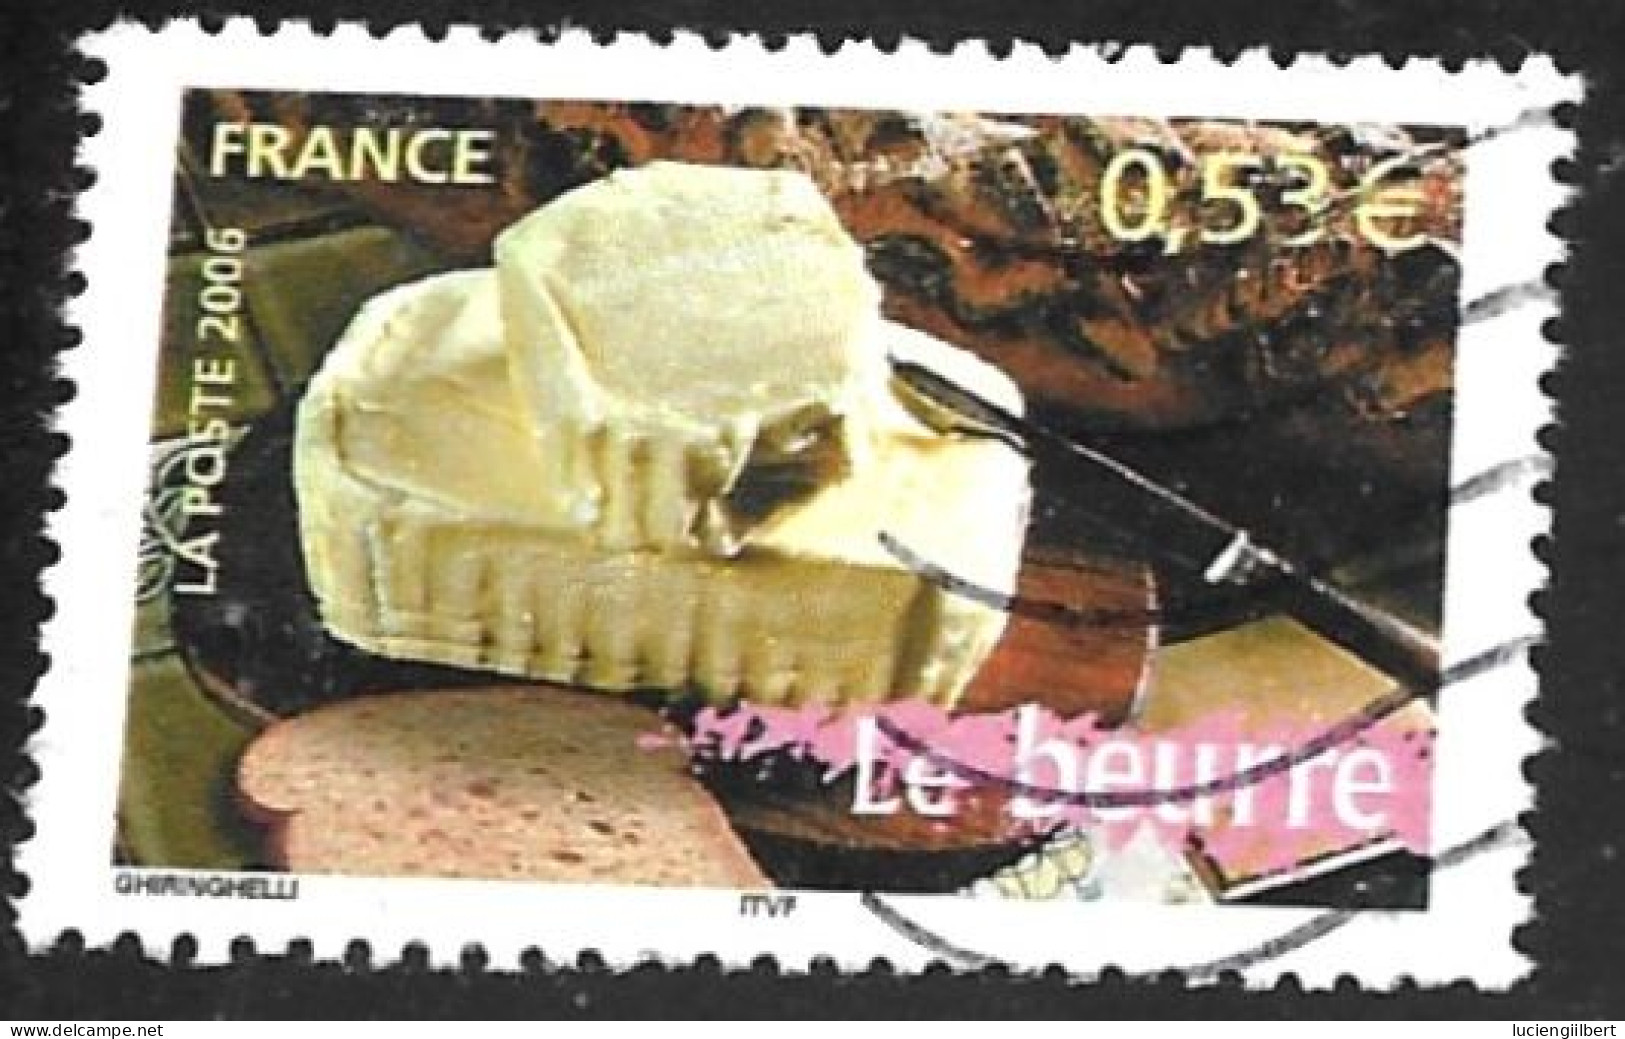 TIMBRE N° 3884   -   LE BEURRE -  OBLITERE  -  2006 - Gebraucht